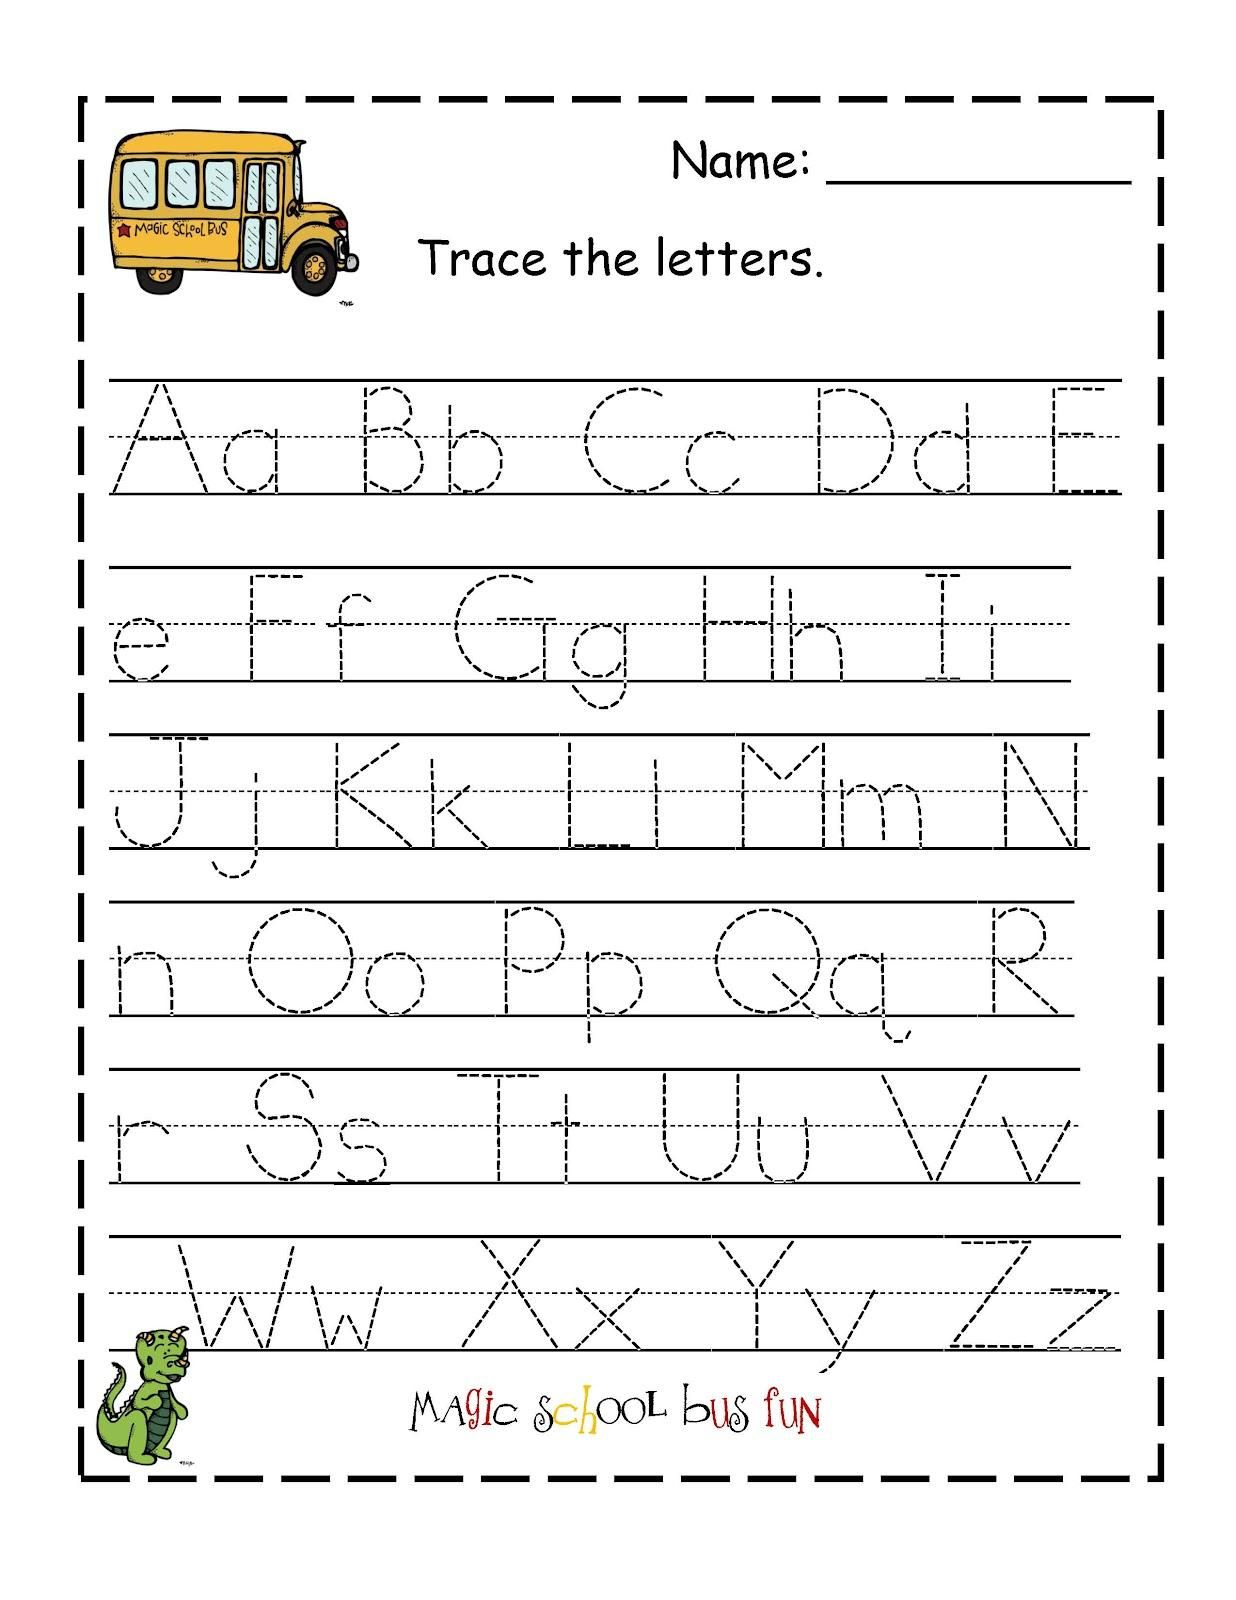 Coloring Book : Printable Letter Tracing Sheets For with Letter Tracing Worksheets Kindergarten Pdf